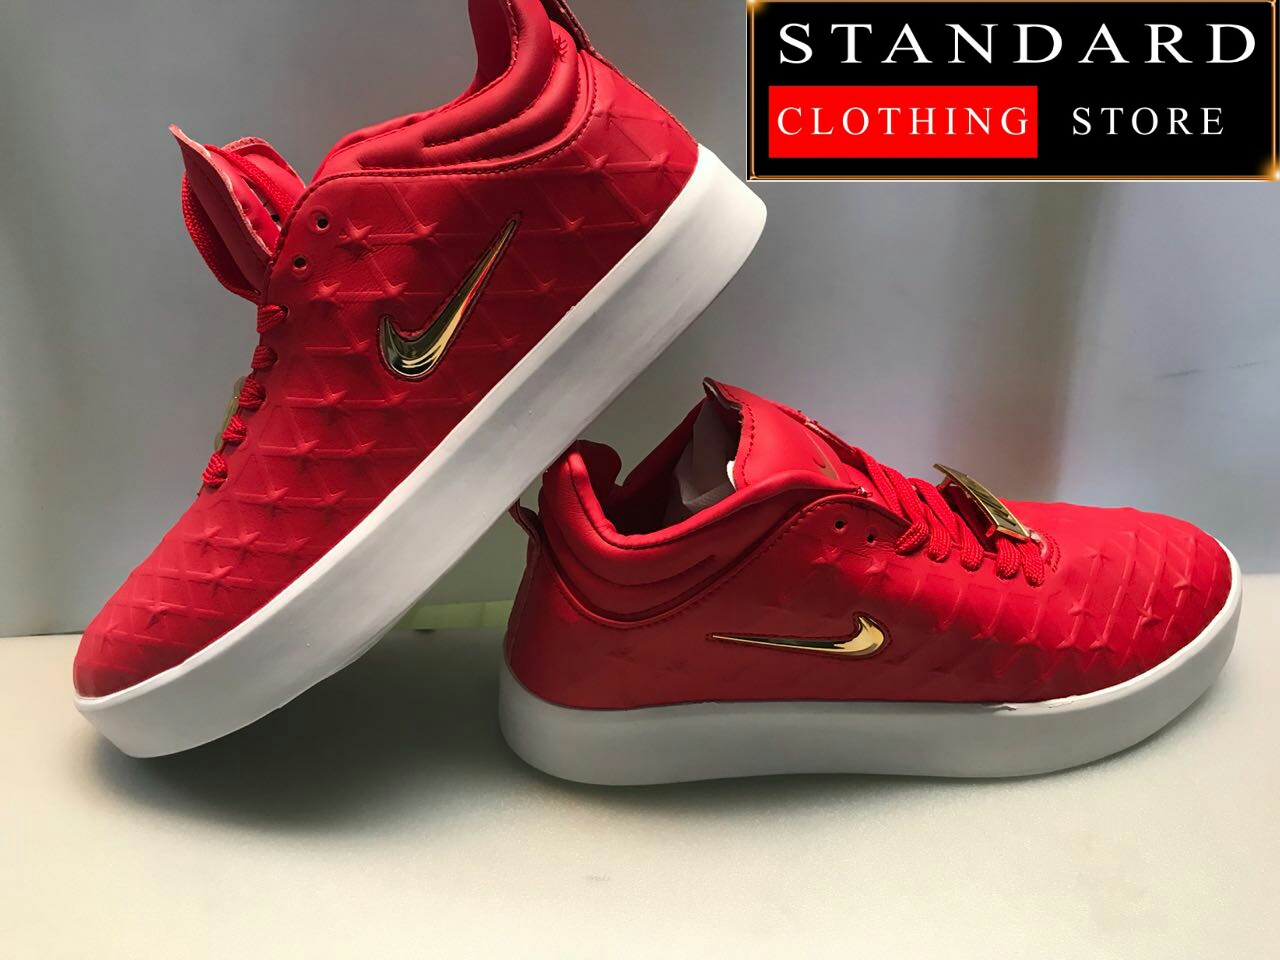 Nike red sneakers - Standard Clothing Store